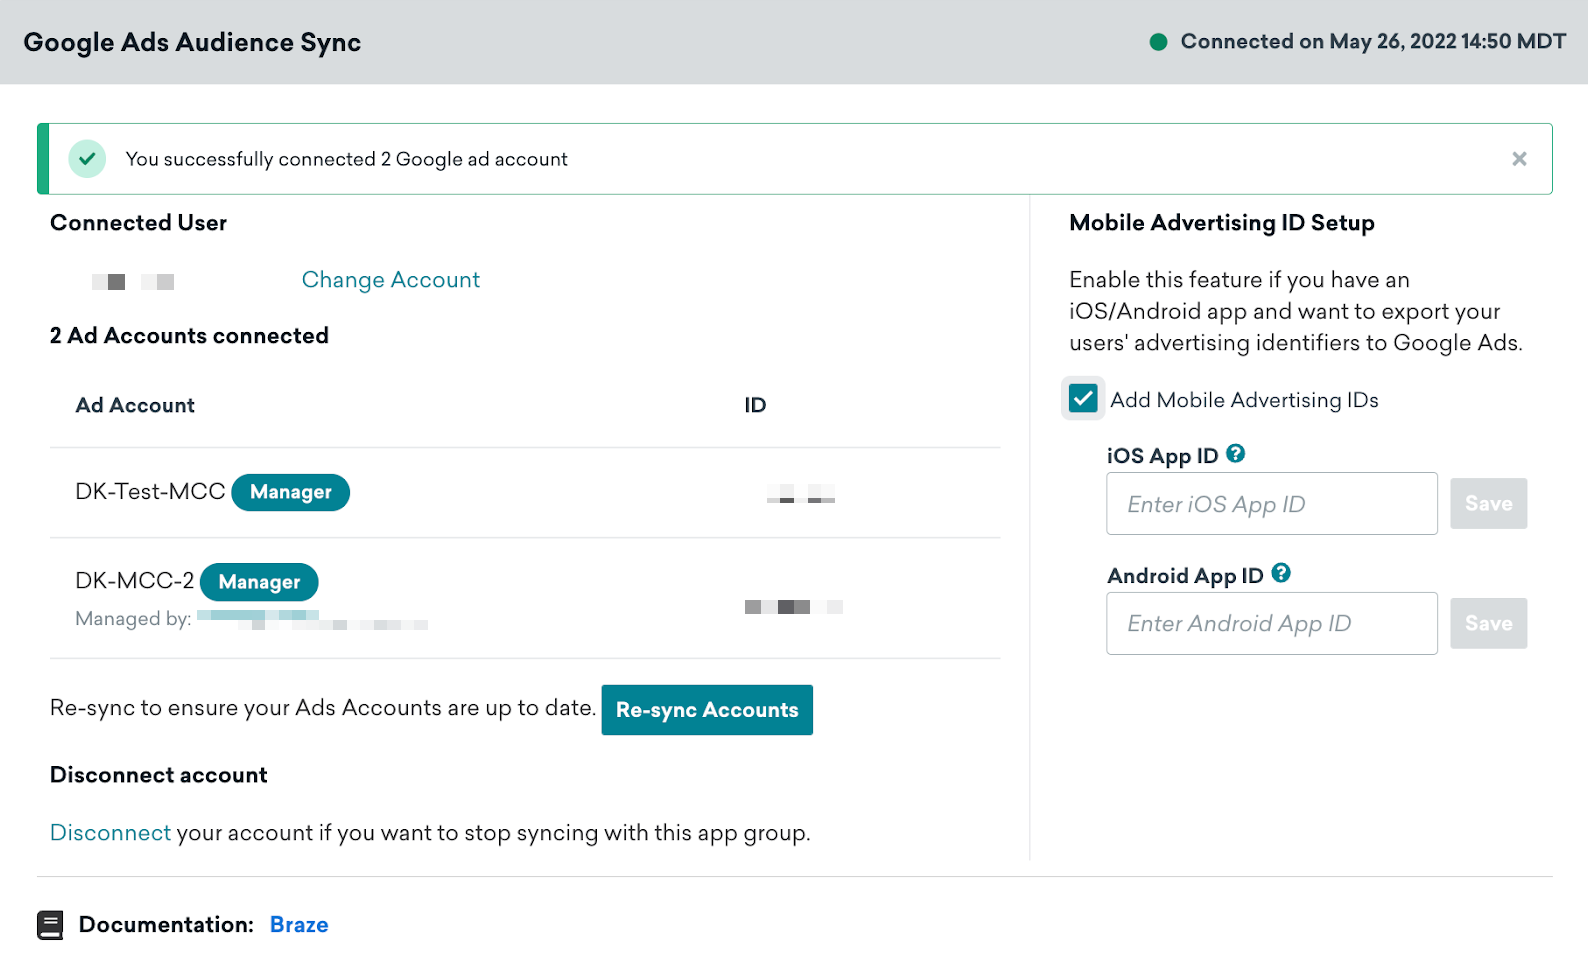 The updated Google Ads technology page showing the Ad accounts connected, allowing you to re-sync accounts and add mobile advertising IDs.